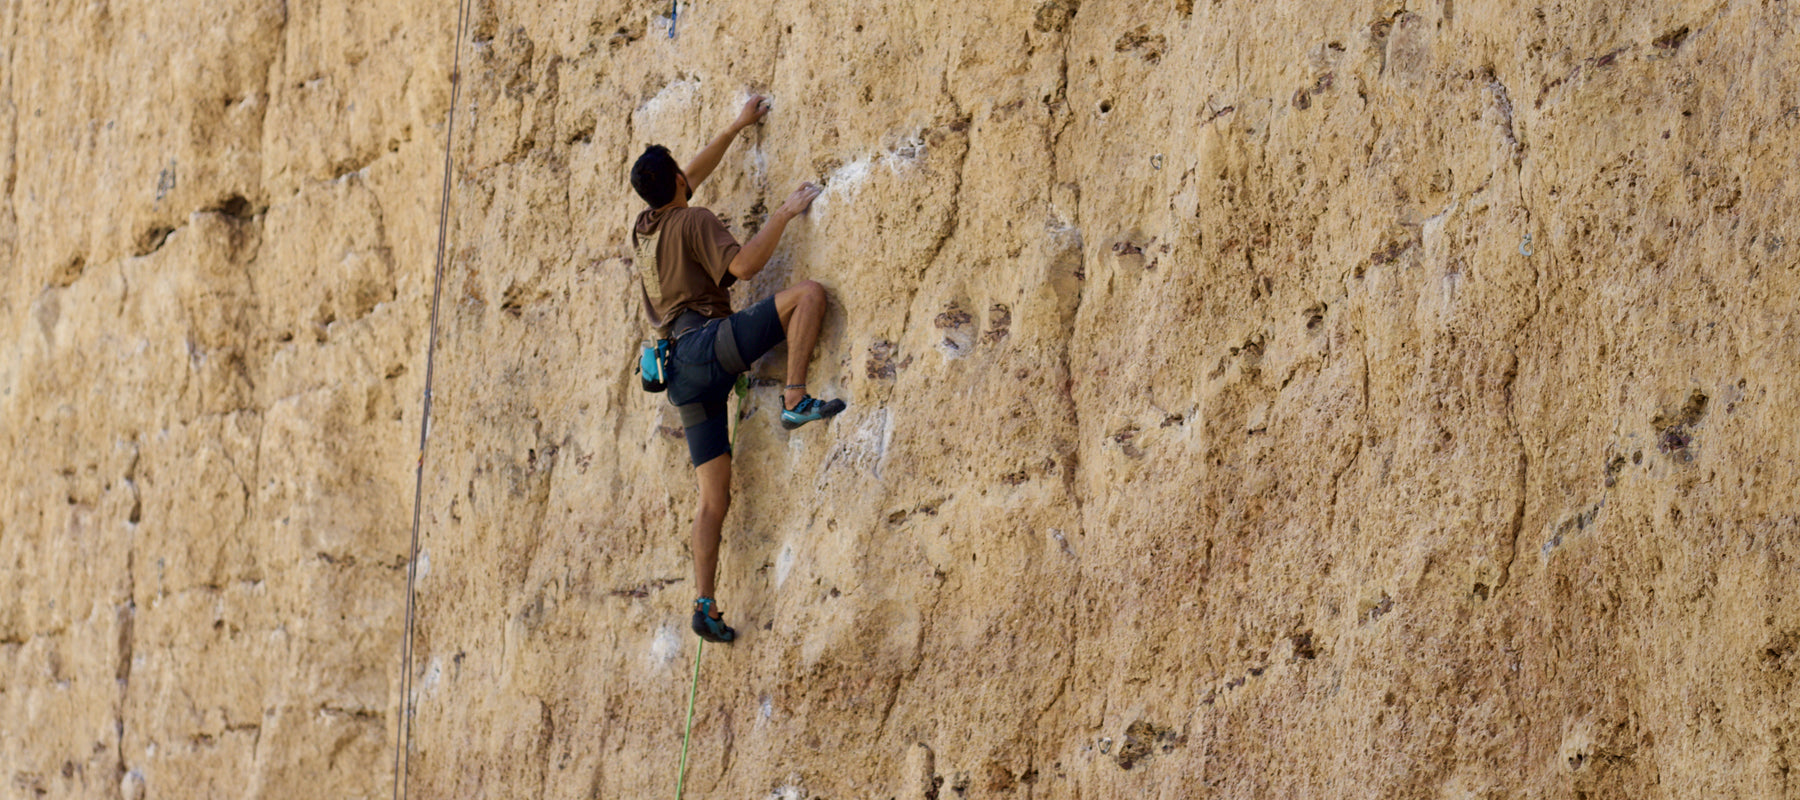 This photograph shows a person climbing on an sheer rock face. They are using ropes and the climber is reaching upward. R